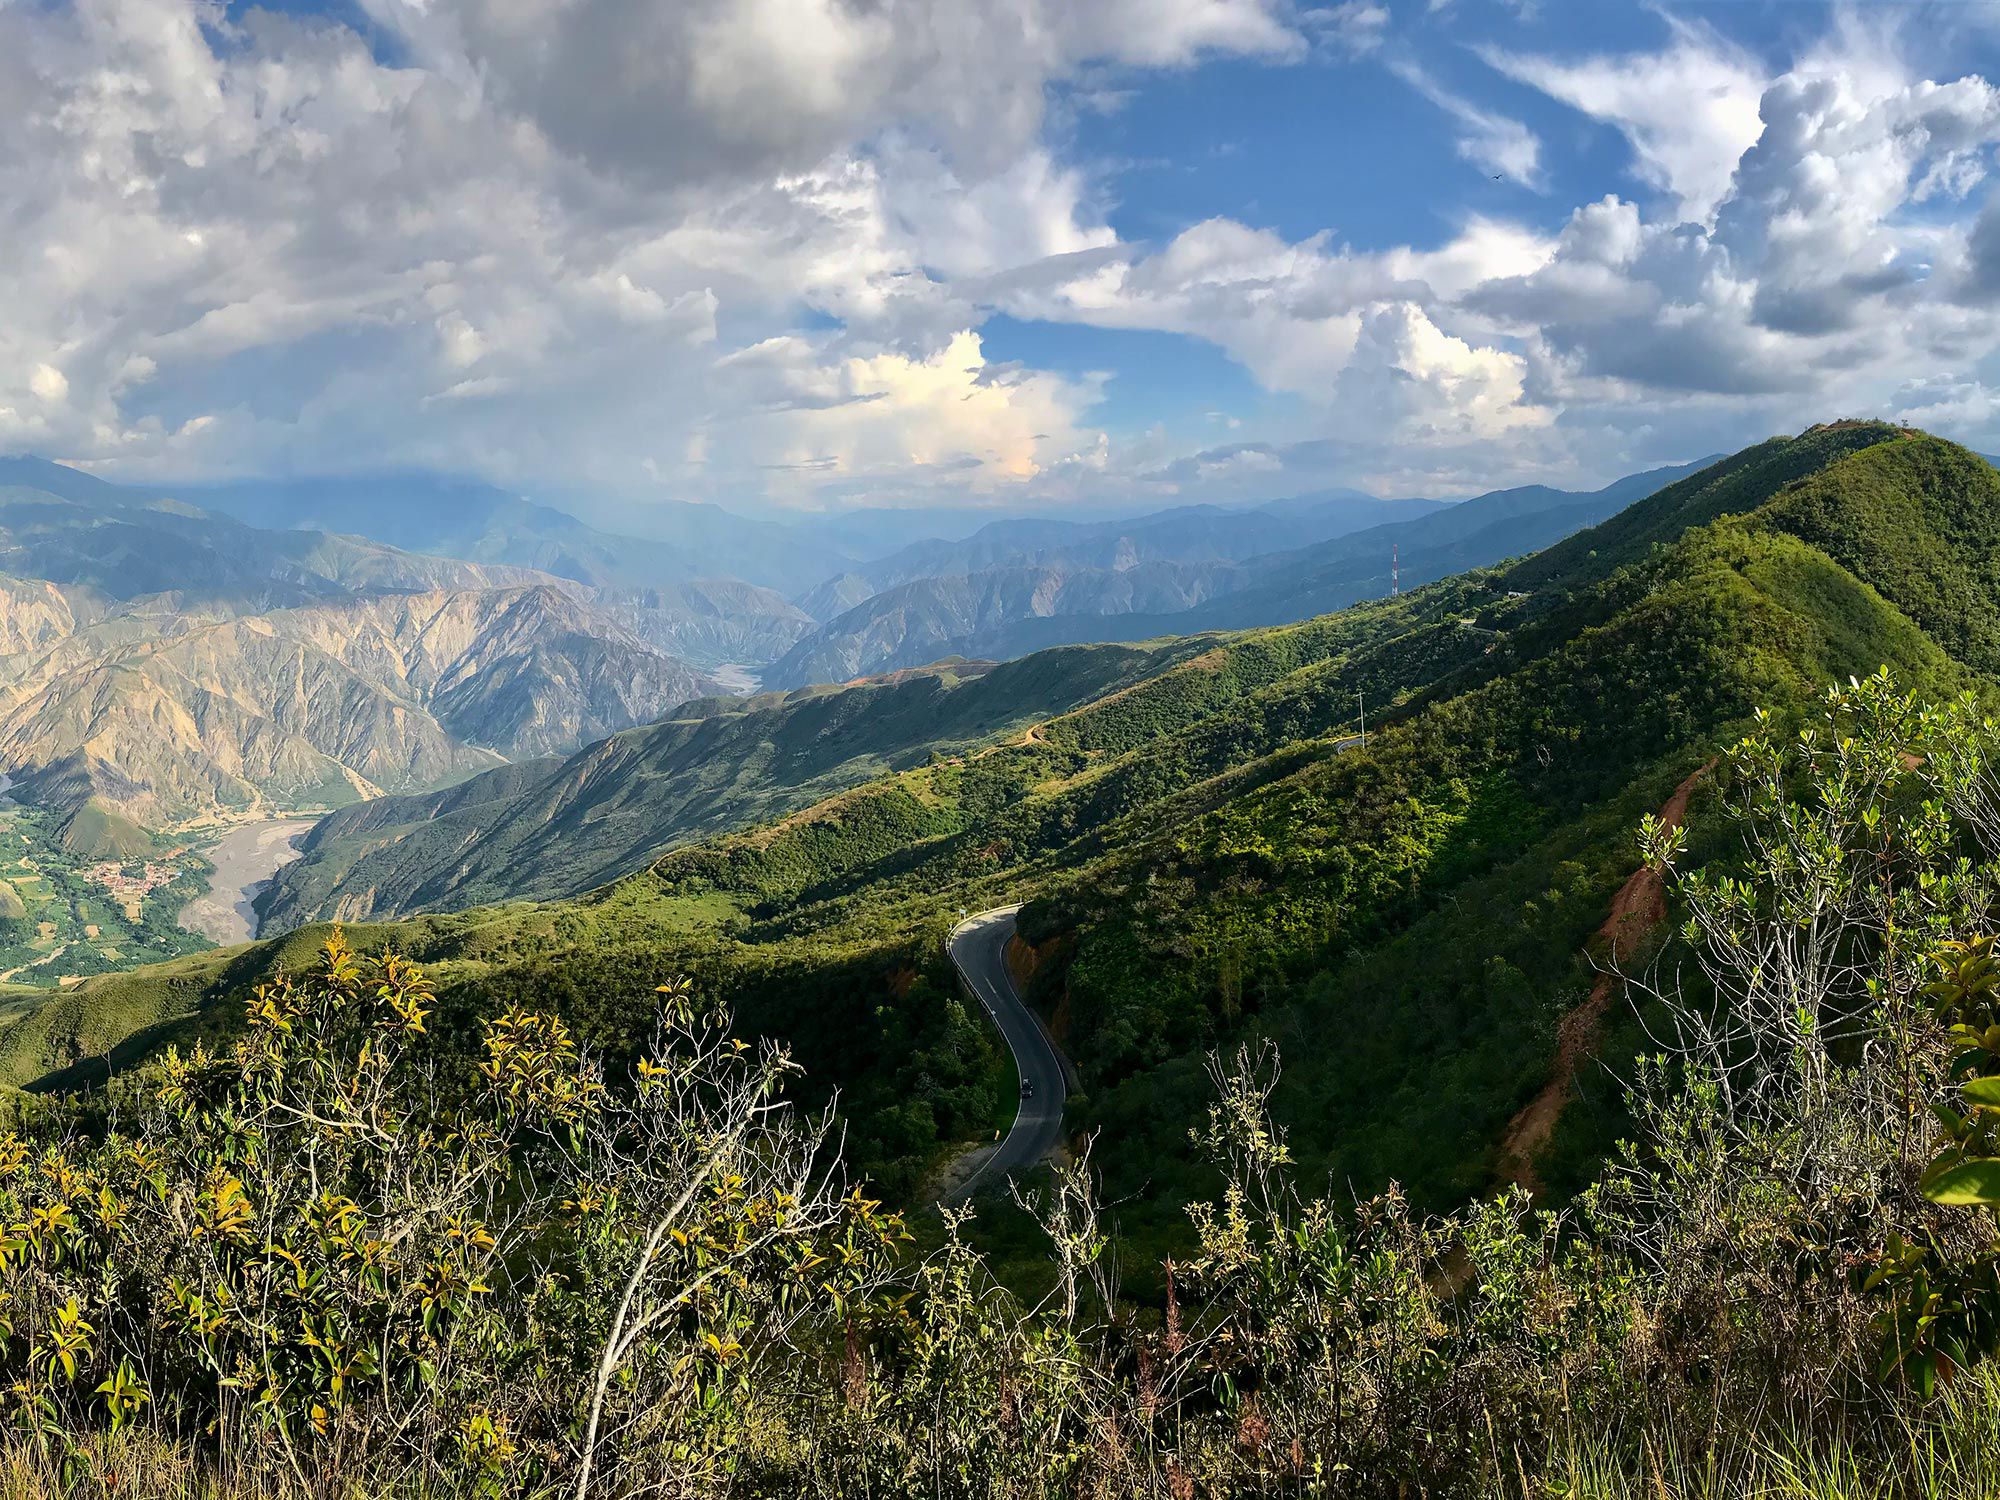 The Chicamocha Canyon road meanders along the river before climbing atop the ridgeline of one of the world’s largest canyons.